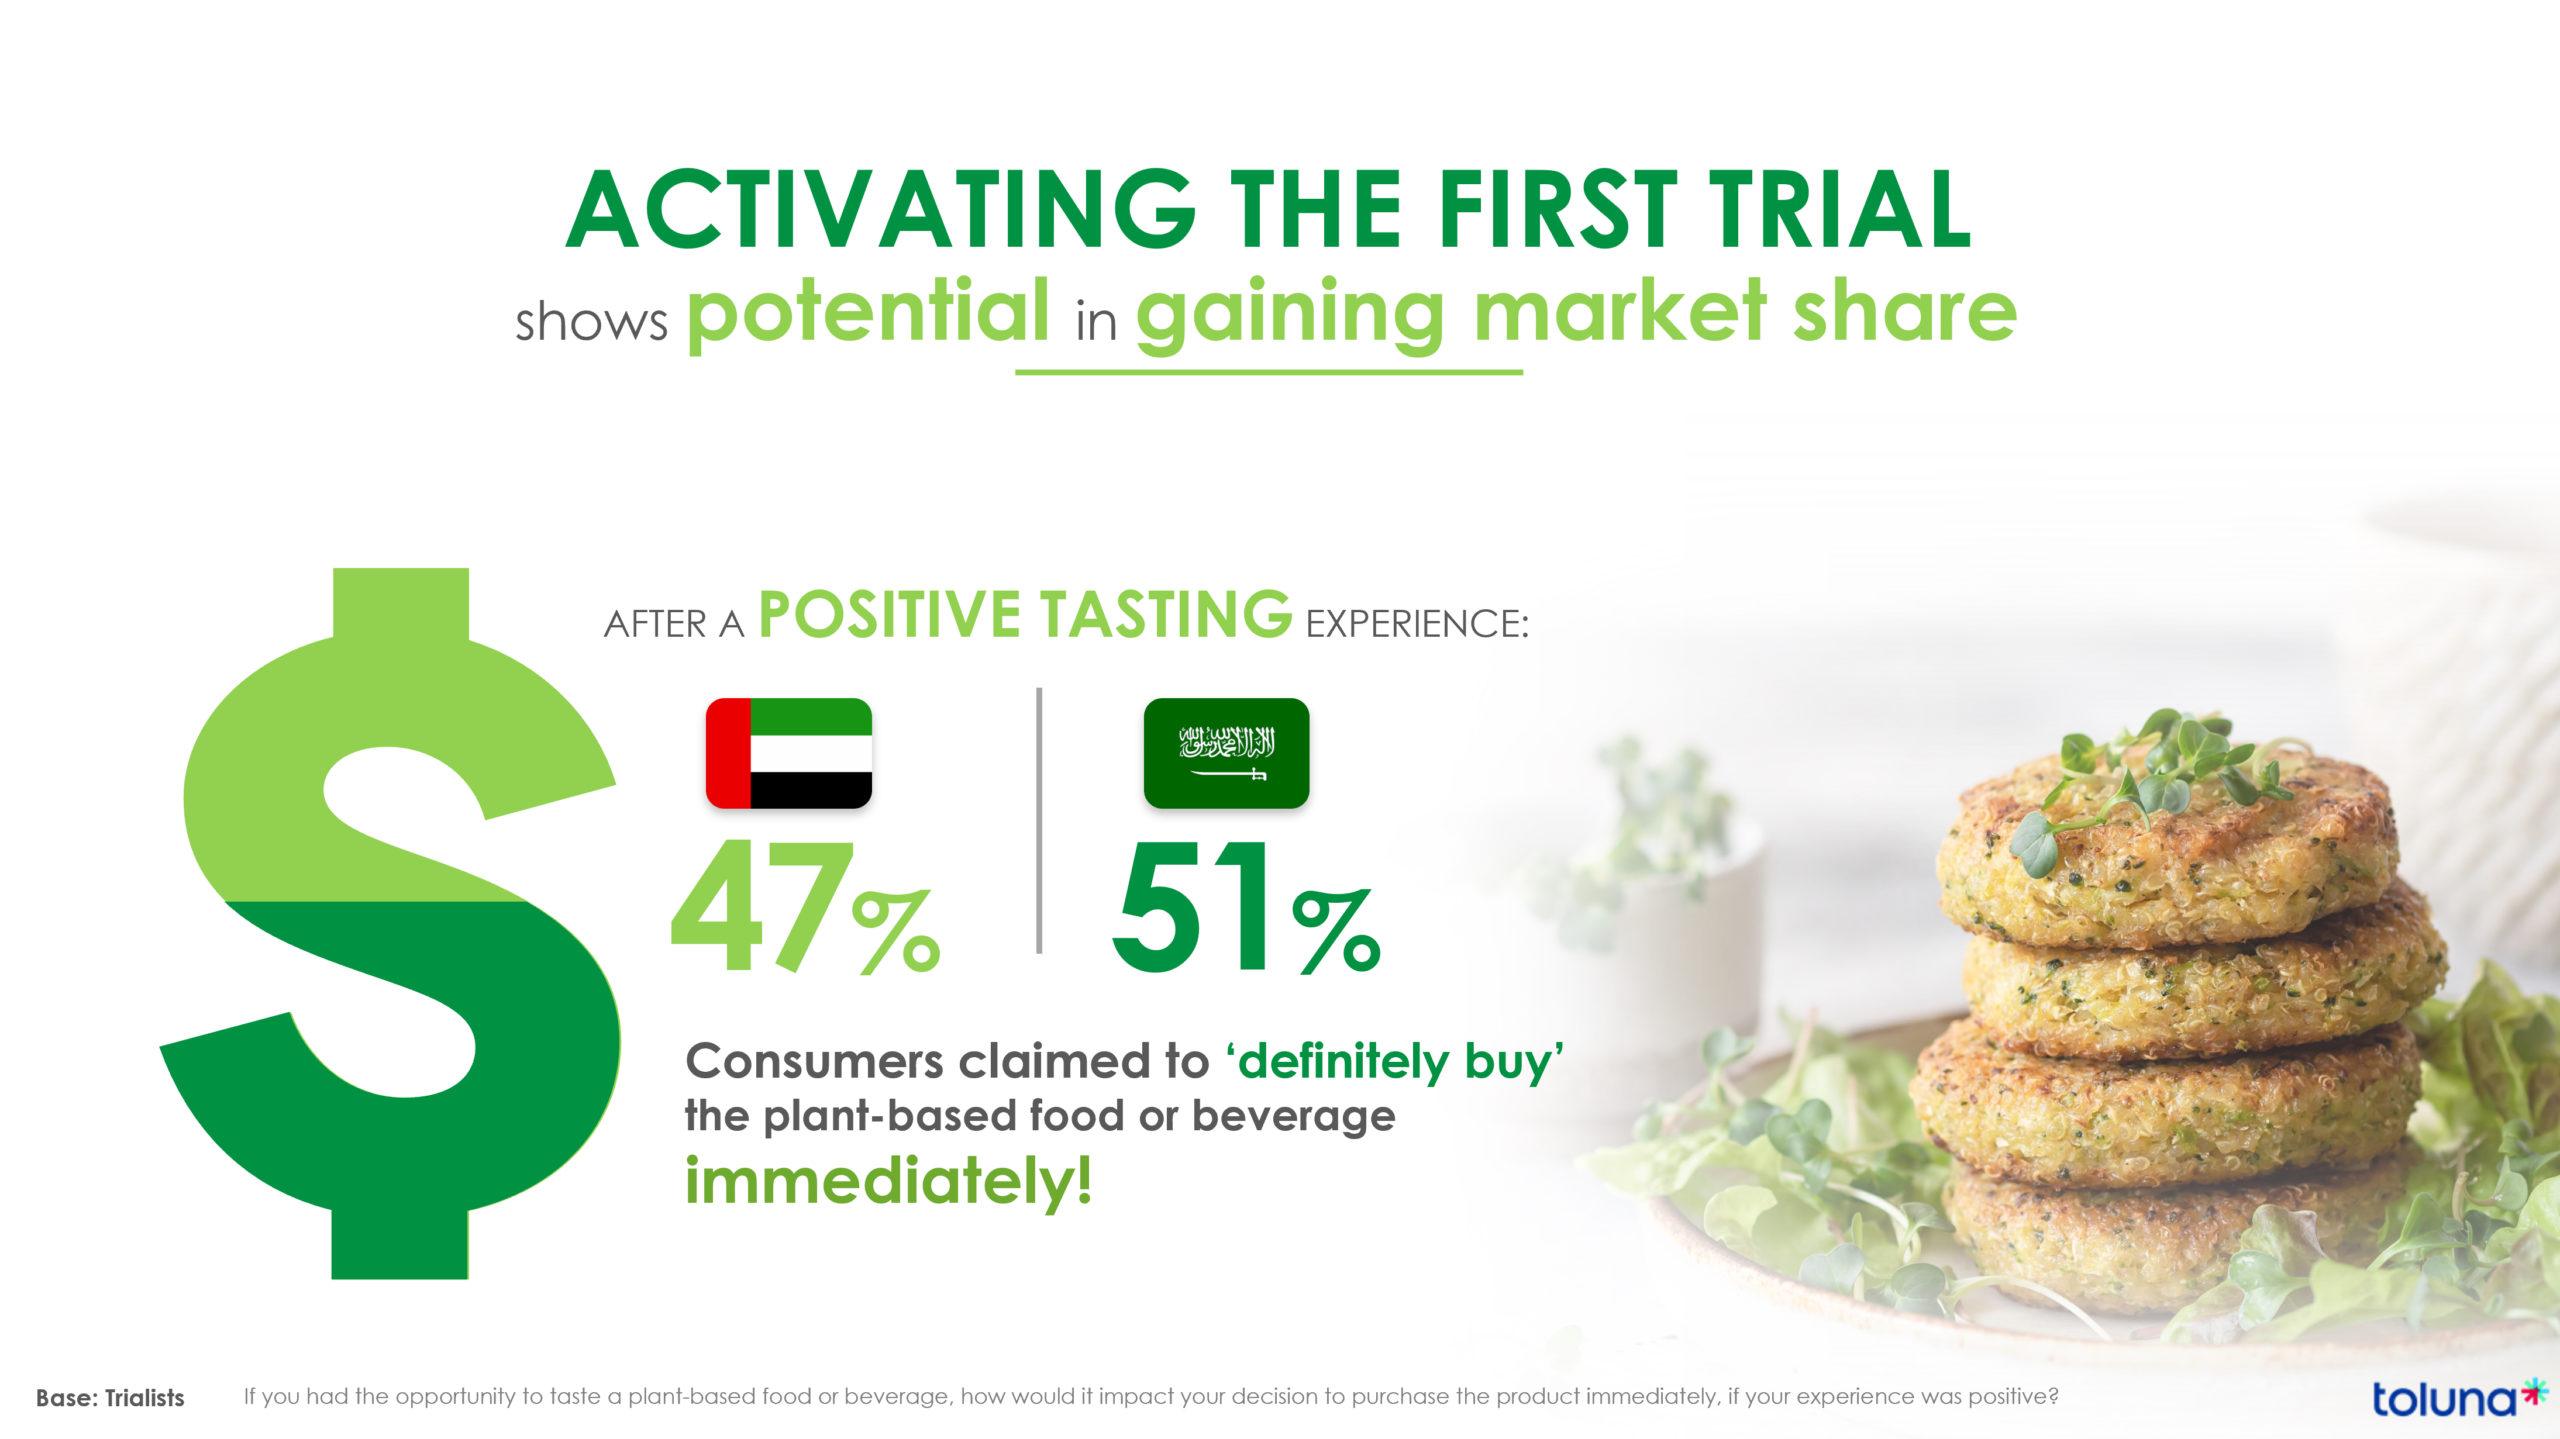 Activating the first trial shows potential in gaining market share | After a positive tasting experience, 47% and 51% of consumers claimed to 'definitely buy' the plant-based food or beverage immediately! | Toluna